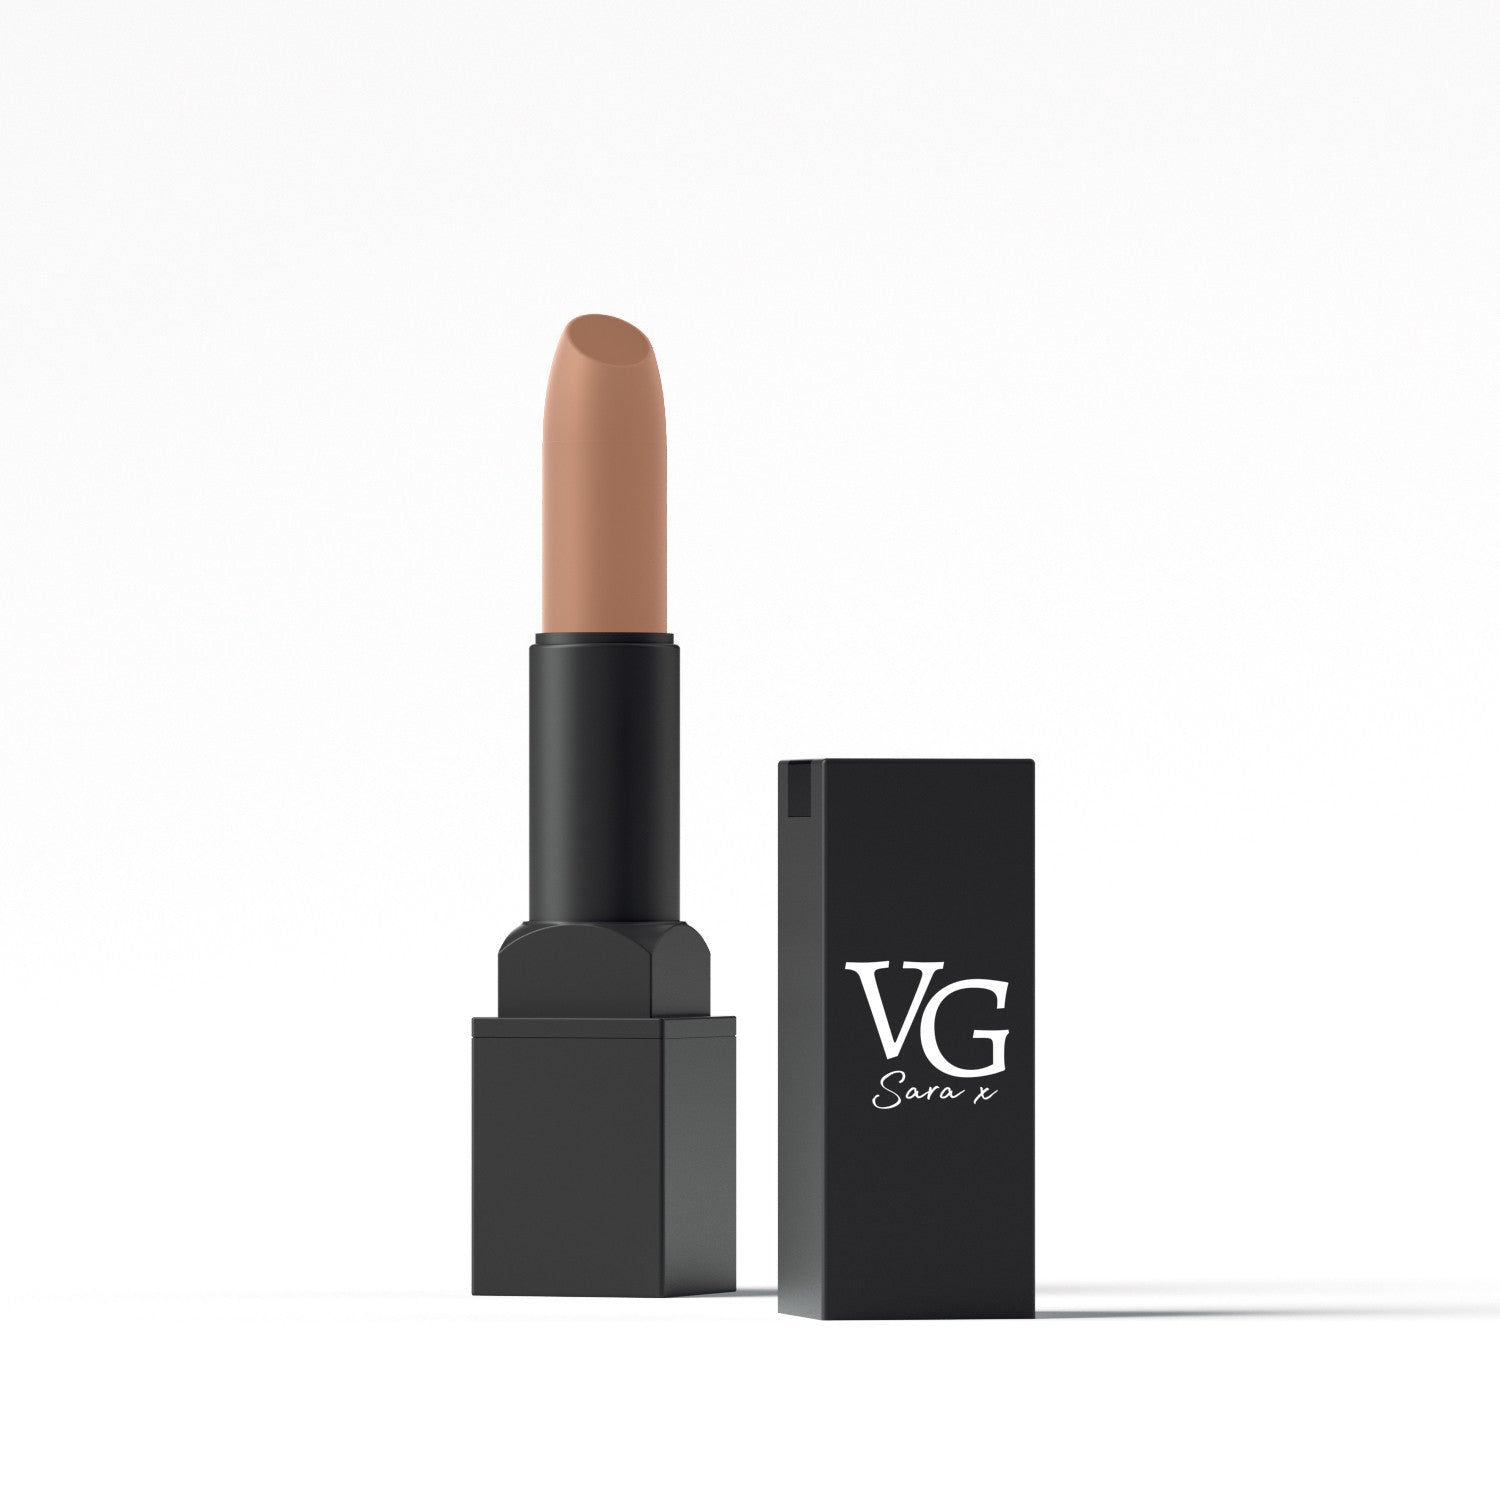 VG branded lipstick with a focus on the name's collection Vg Sara x